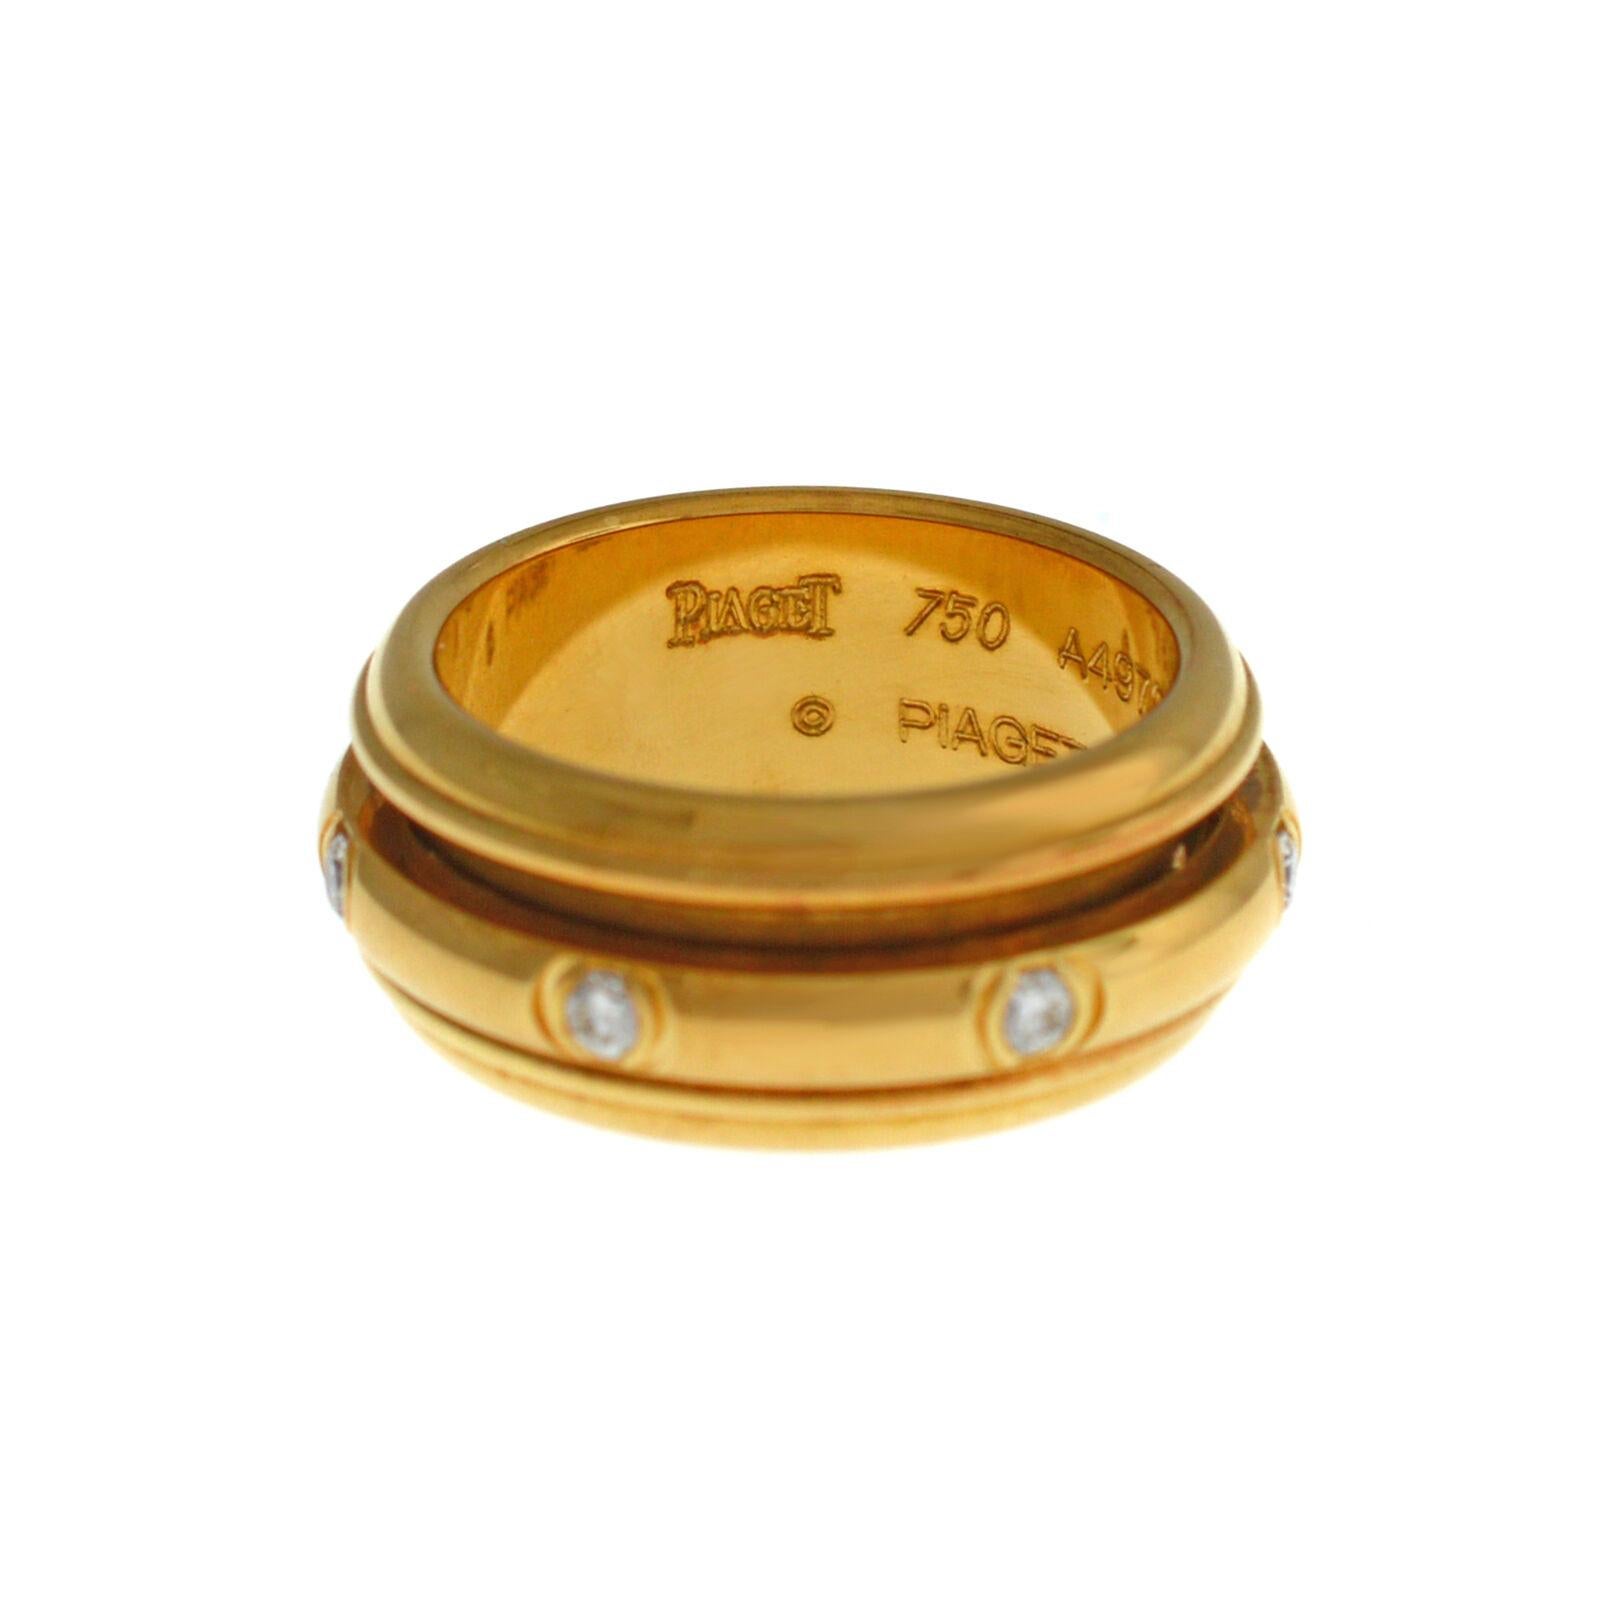 Brand	Piaget
Model	Possession
Gender	Ladies
Condition	New Old Stock
Metal 	18K Yellow Gold
Metal Weight	14 gr.
Retail / List Price	
Ring Size	
7.75 size
This stunning Rotating Double Piaget ring is made from 18K Yellow Gold weighting at 14 gr. and